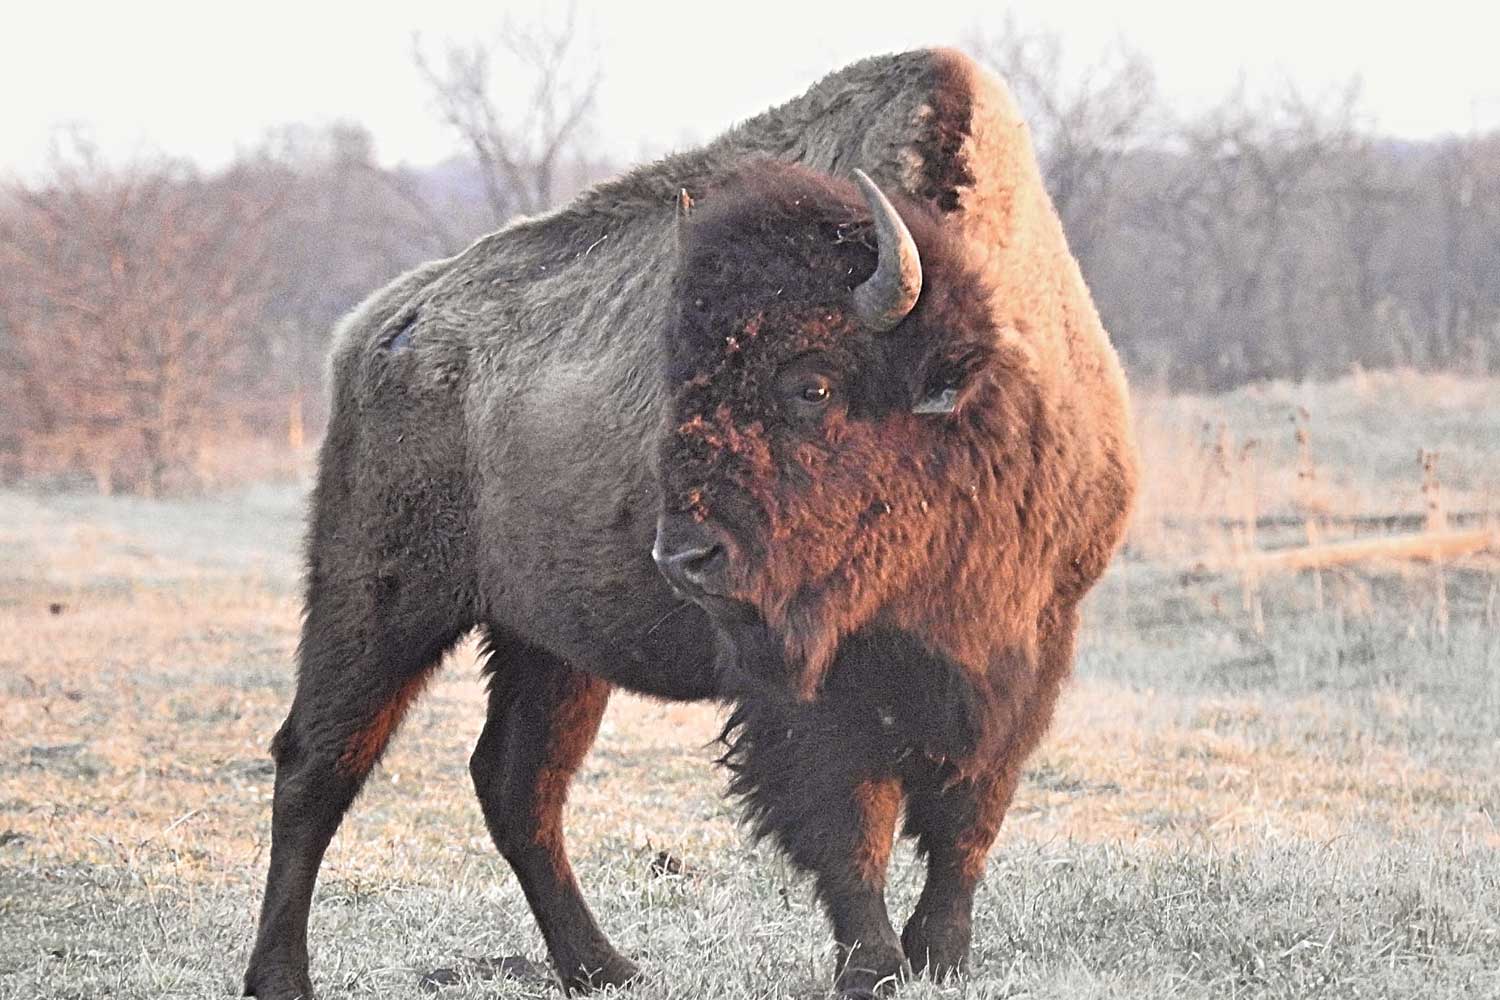 Bison on the prairie in the winter